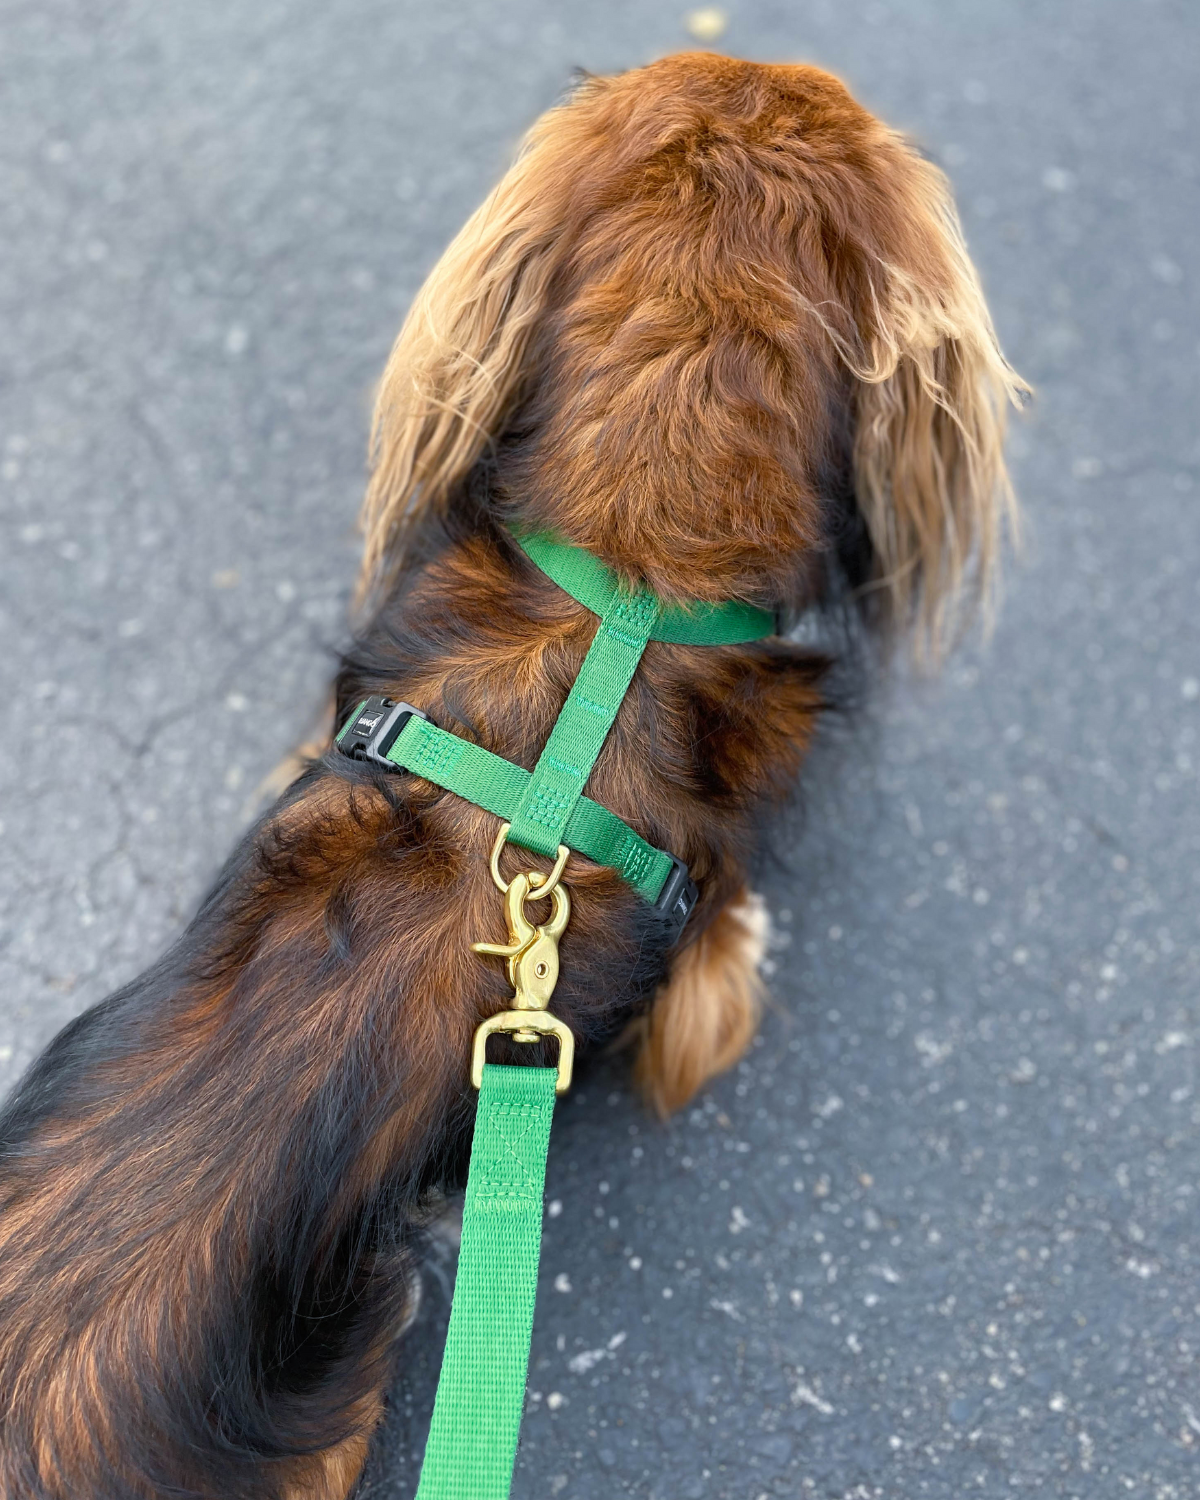 DJANGO's Adventure Dog Harness is a padded, lightweight, and durable harness for outdoor adventures and everyday use. Dog's (and their hoomans) love DJANGO's super soft custom webbing. Pair with your favorite DJANGO leash and collar - djangobrand.com